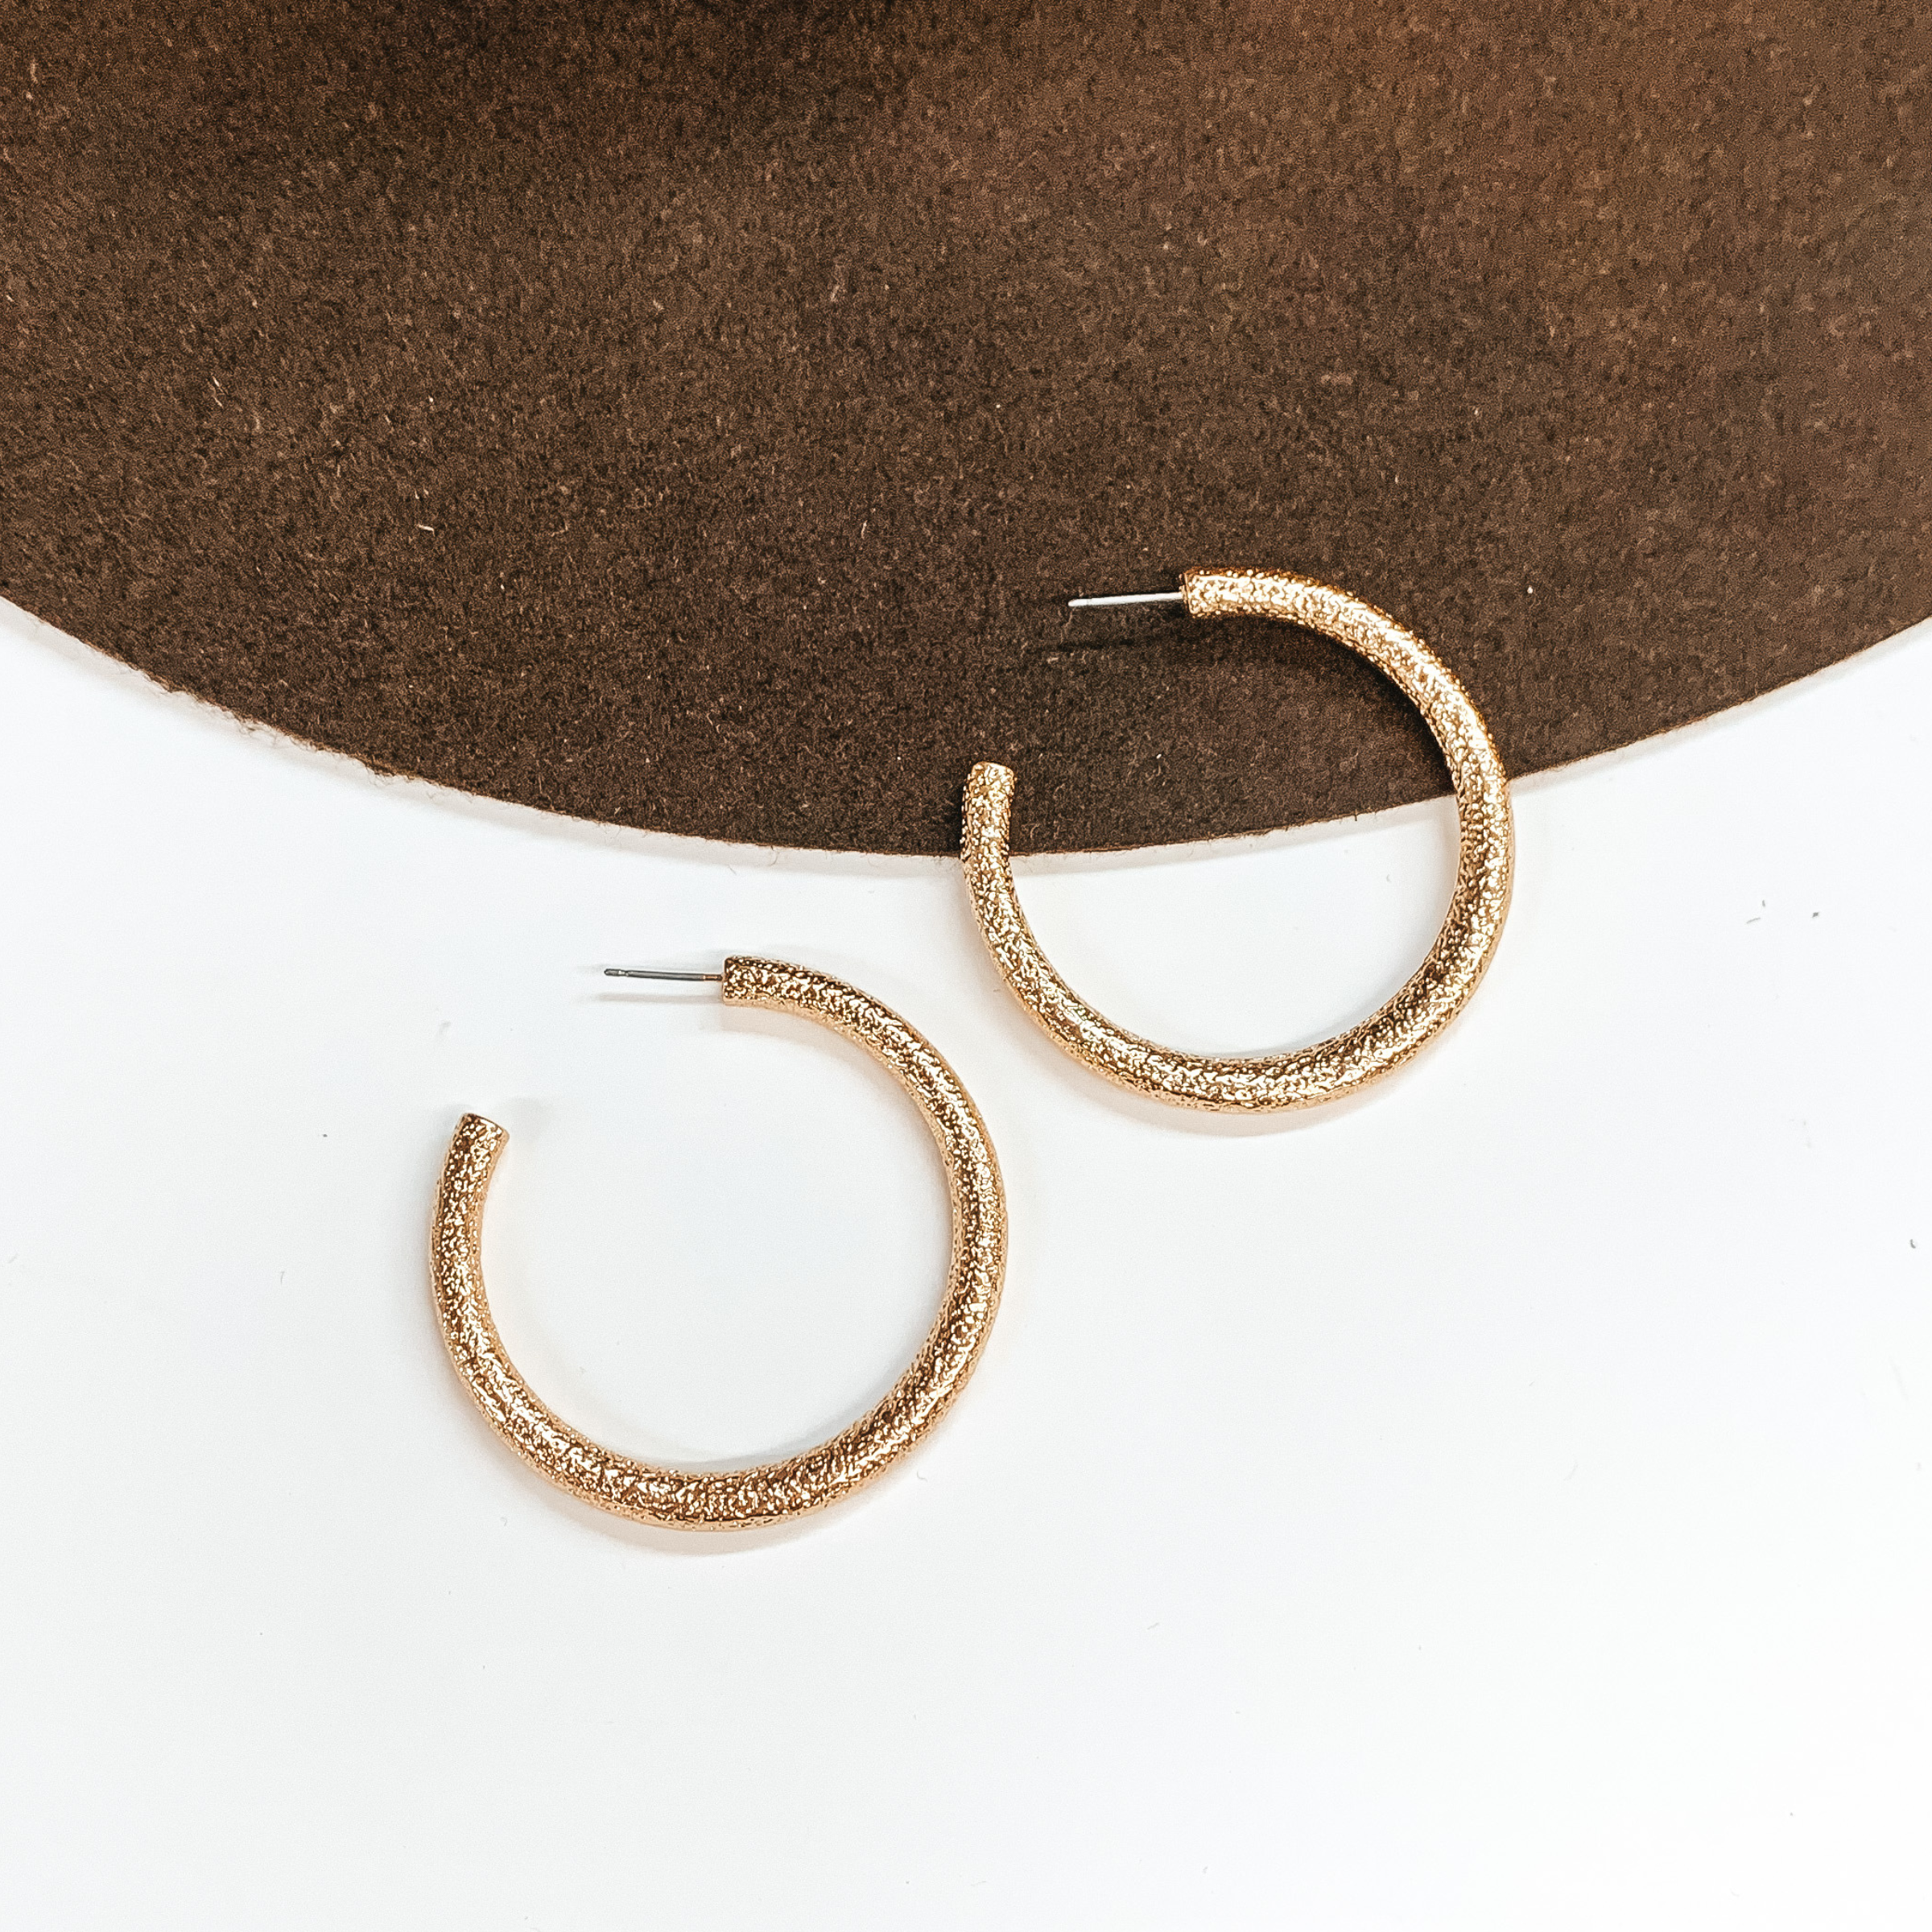 Textured Large Sized Hoop Earrings in Gold - Giddy Up Glamour Boutique